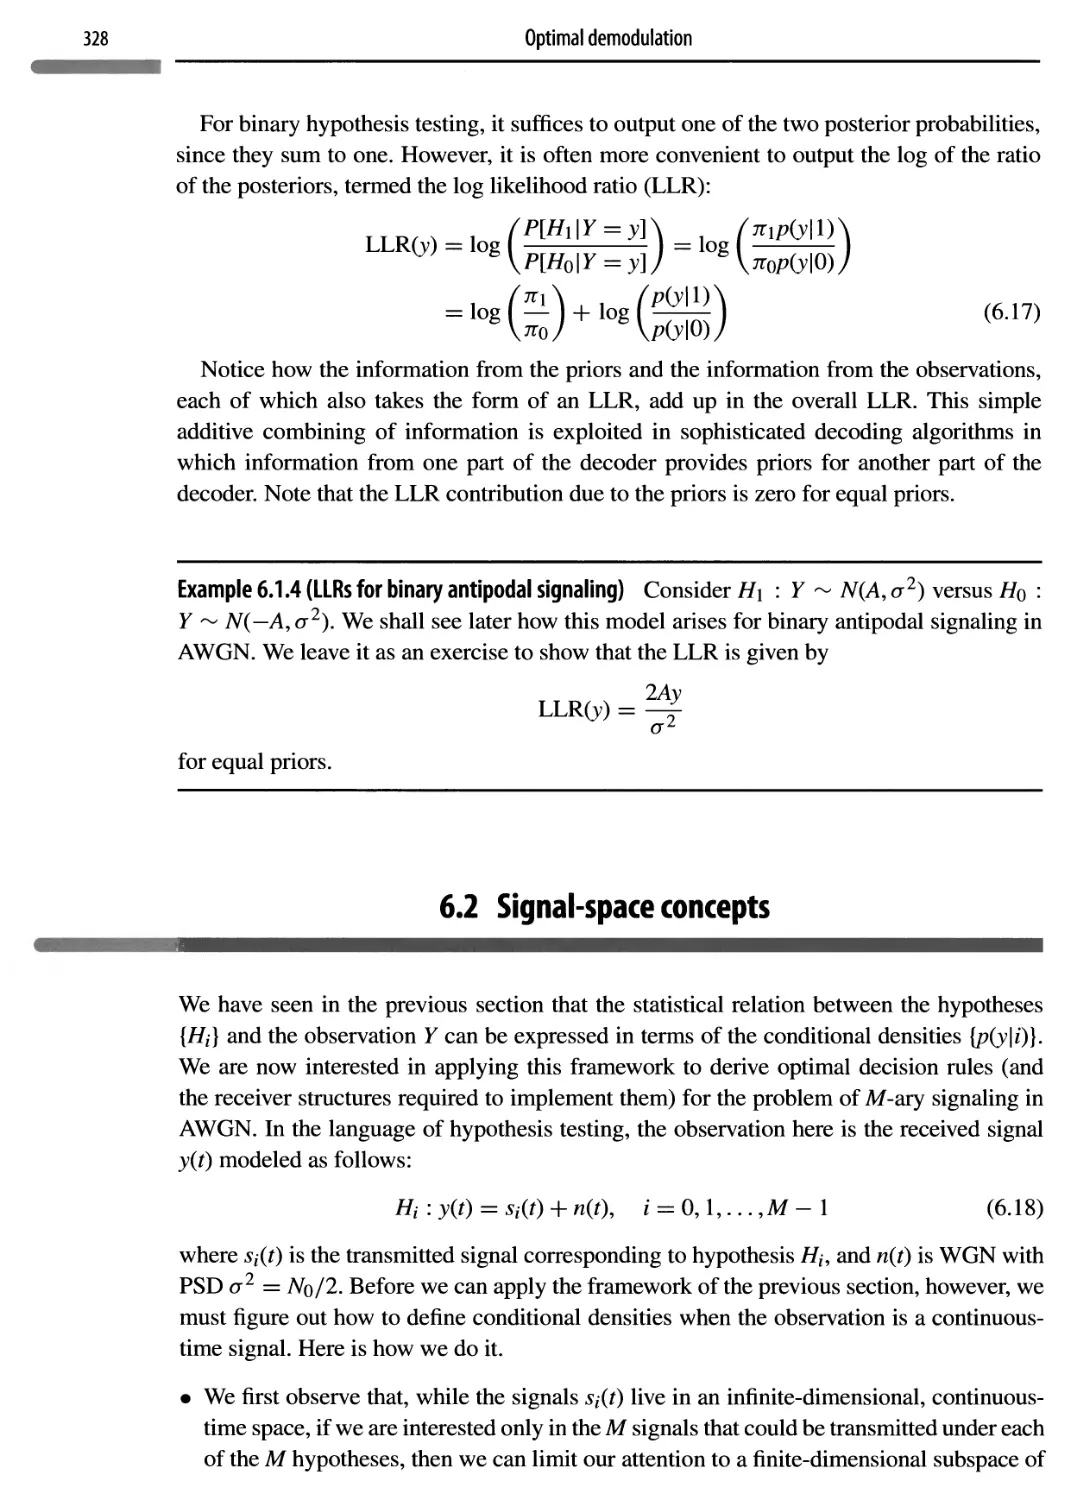 6.2 Signal-space concepts 328